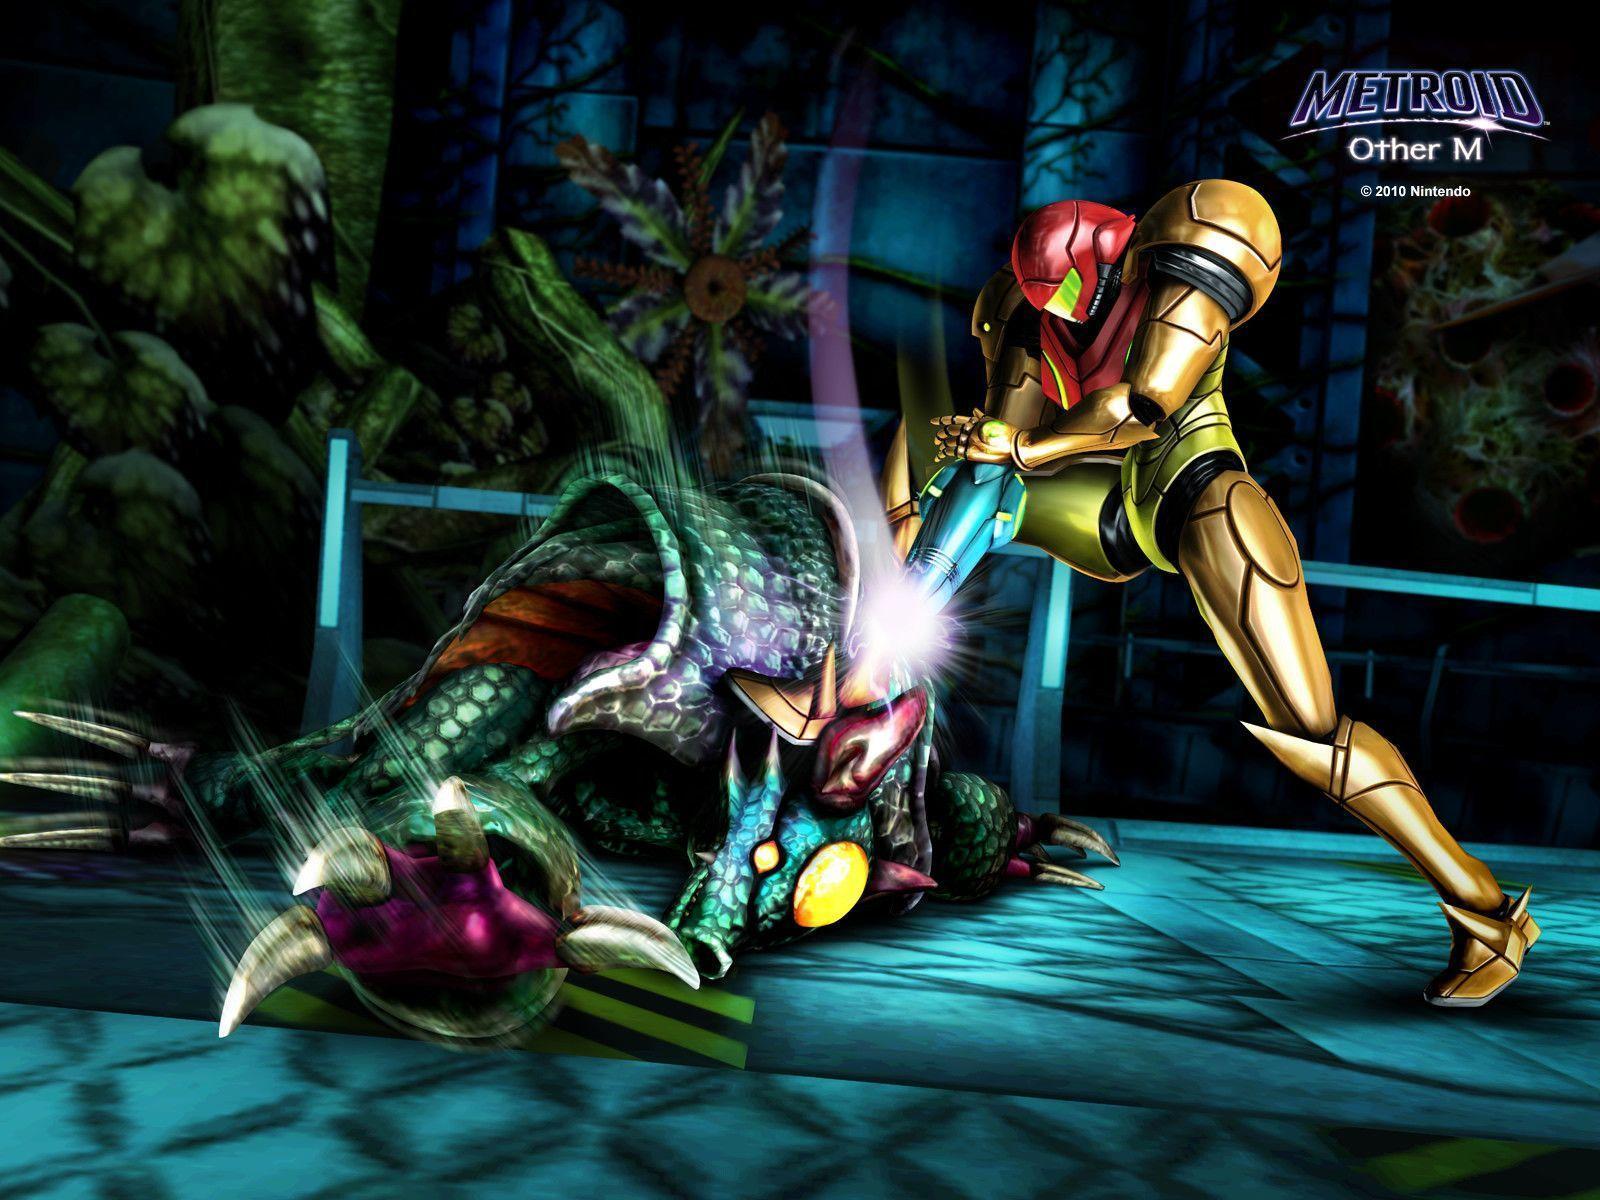 Wallpaper: Other M (Metroid Recon)